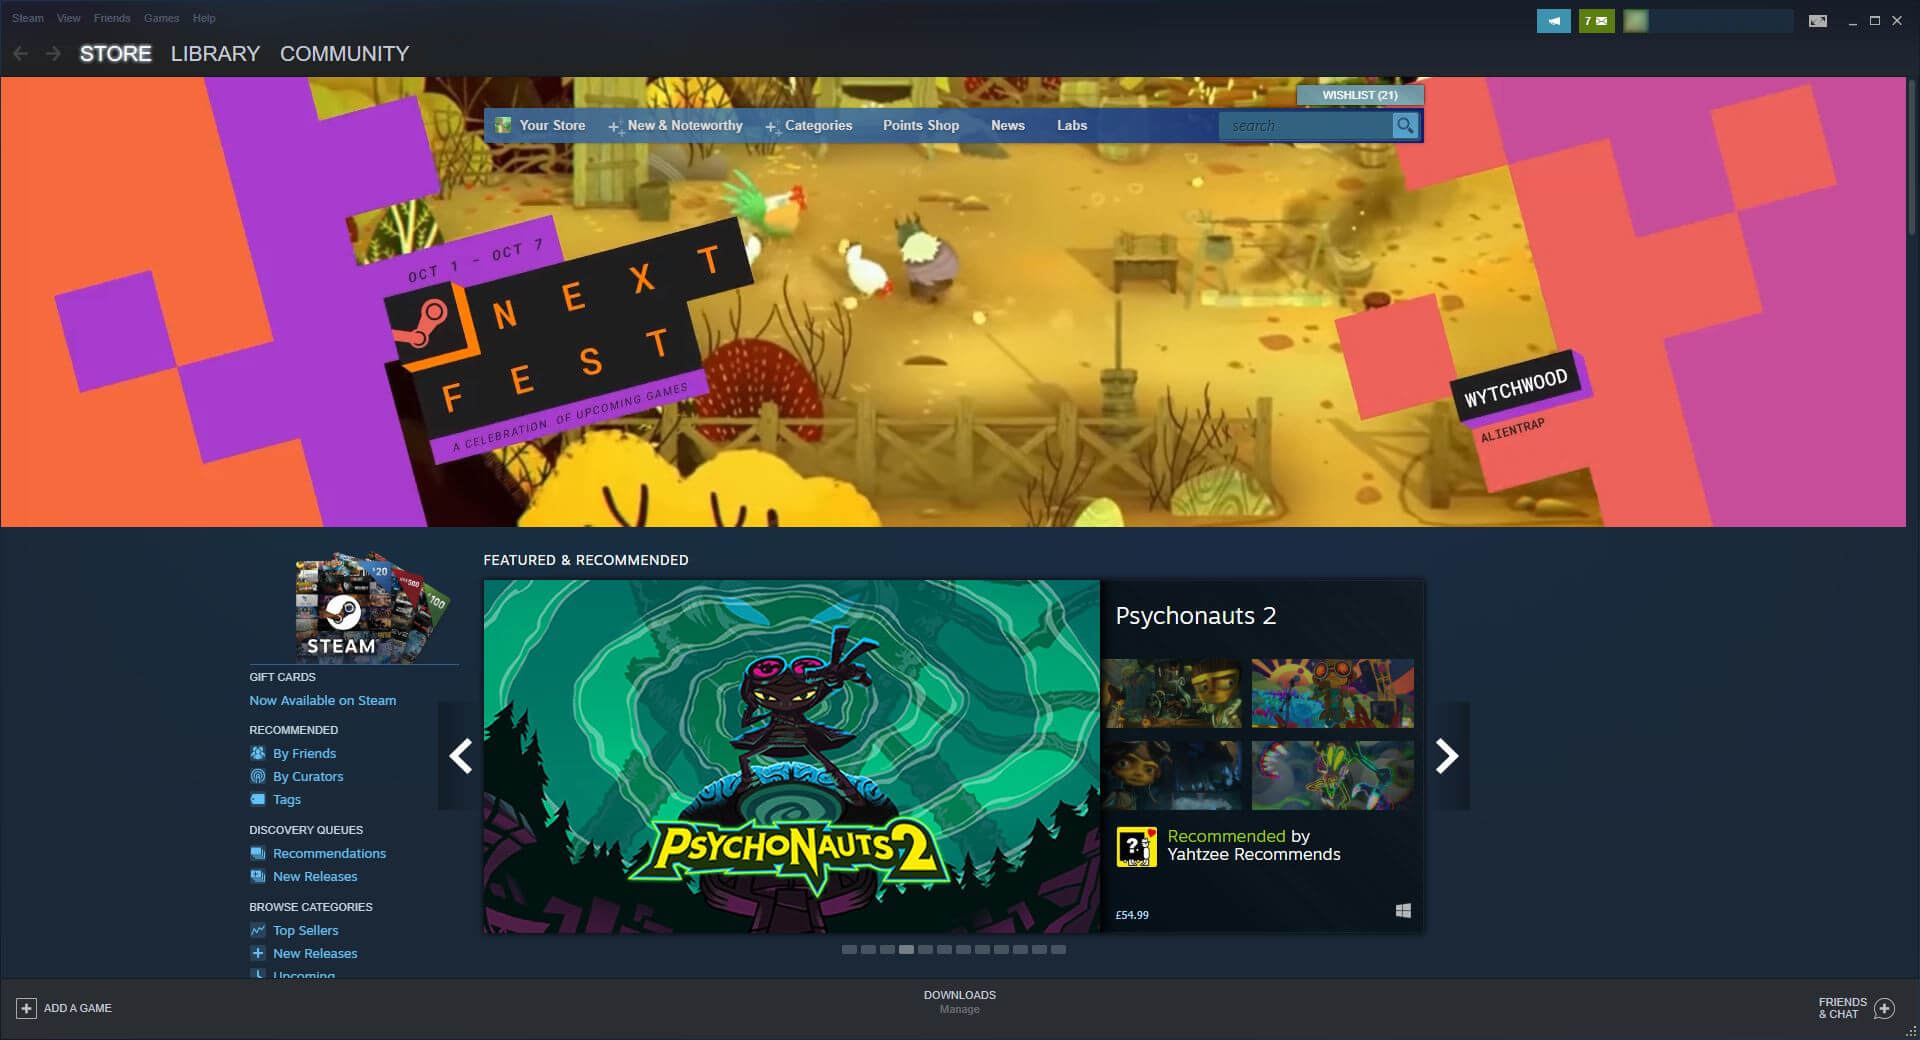 The main store window on Valve's digital storefront Steam, to which Twitch is reportedly developing a competitor